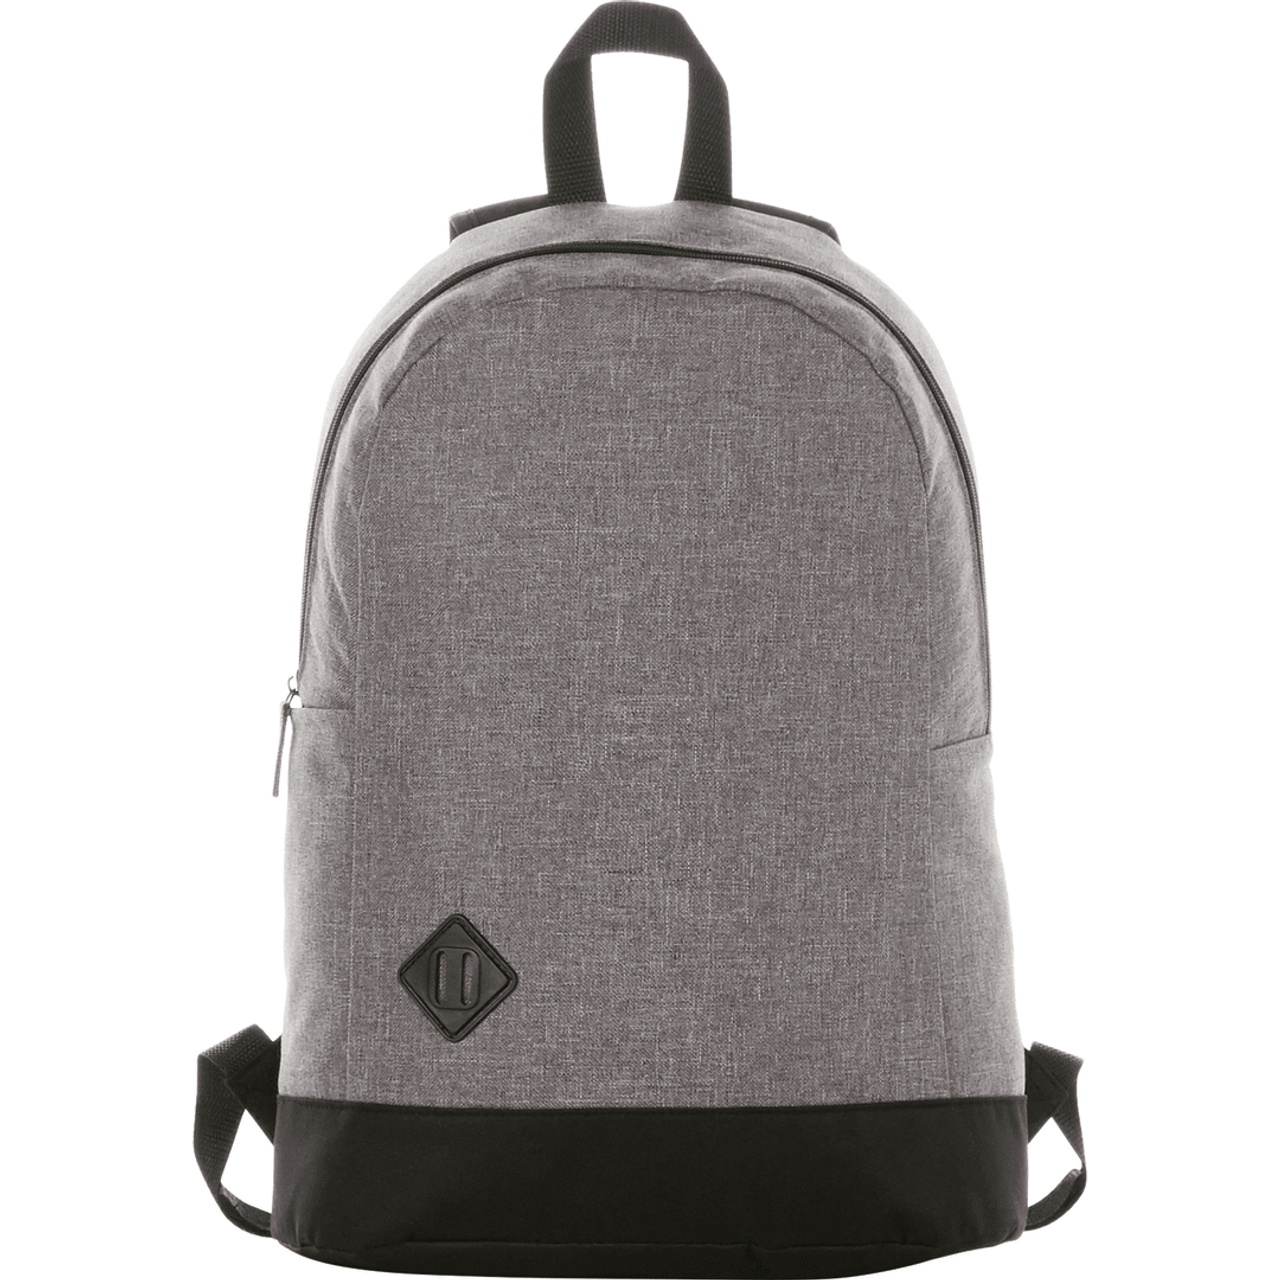 Custom Graphite Dome 15" Computer Backpack